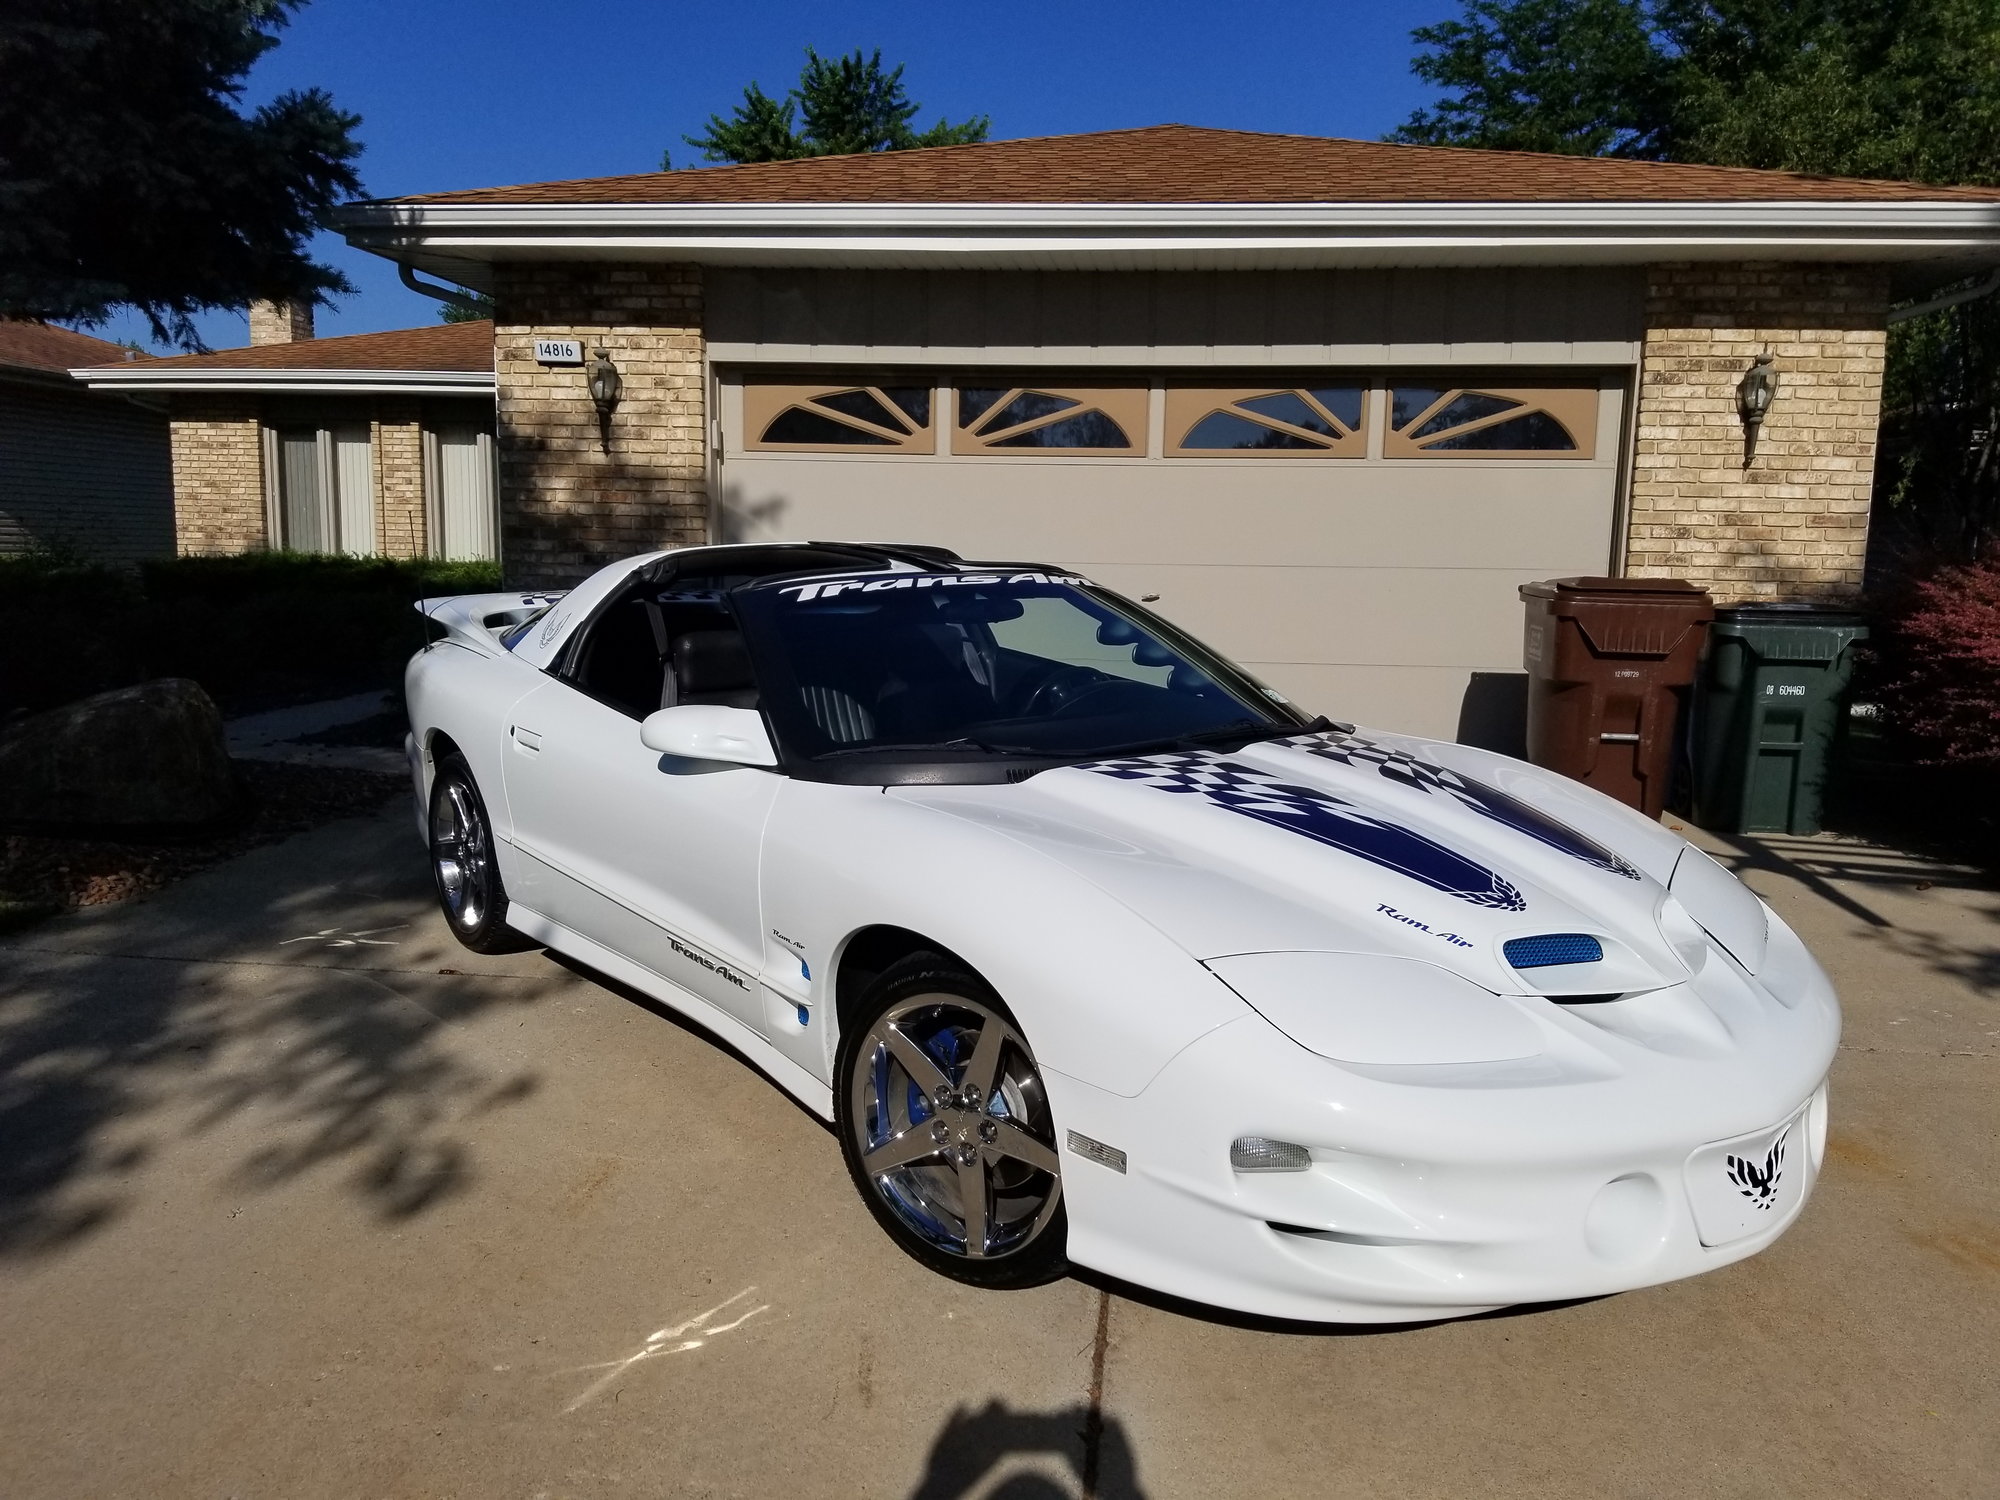 2002 Pontiac Firebird - 2002 WS6 Supercharged - Used - VIN 2G2FV22G422117314 - 69,000 Miles - 8 cyl - 2WD - Automatic - Coupe - White - Oak Forest, IL 60452, United States